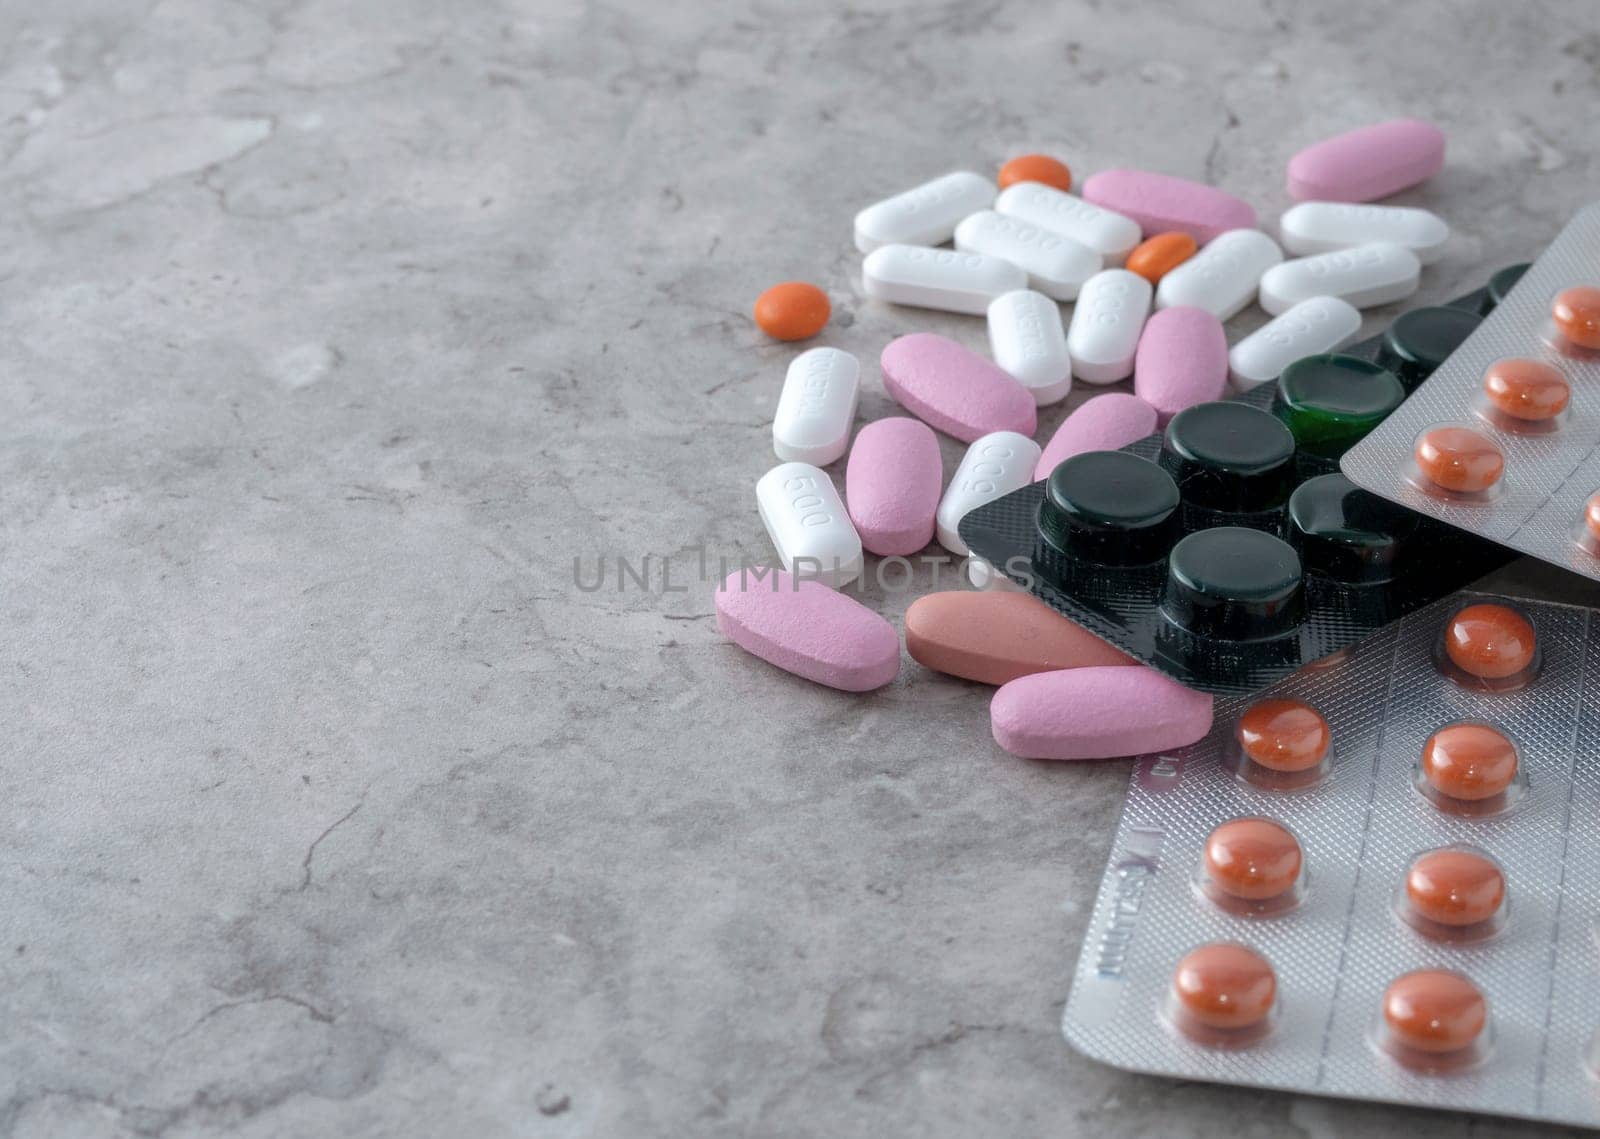 multicolored medical pills and packs of pills on a table by Andre1ns